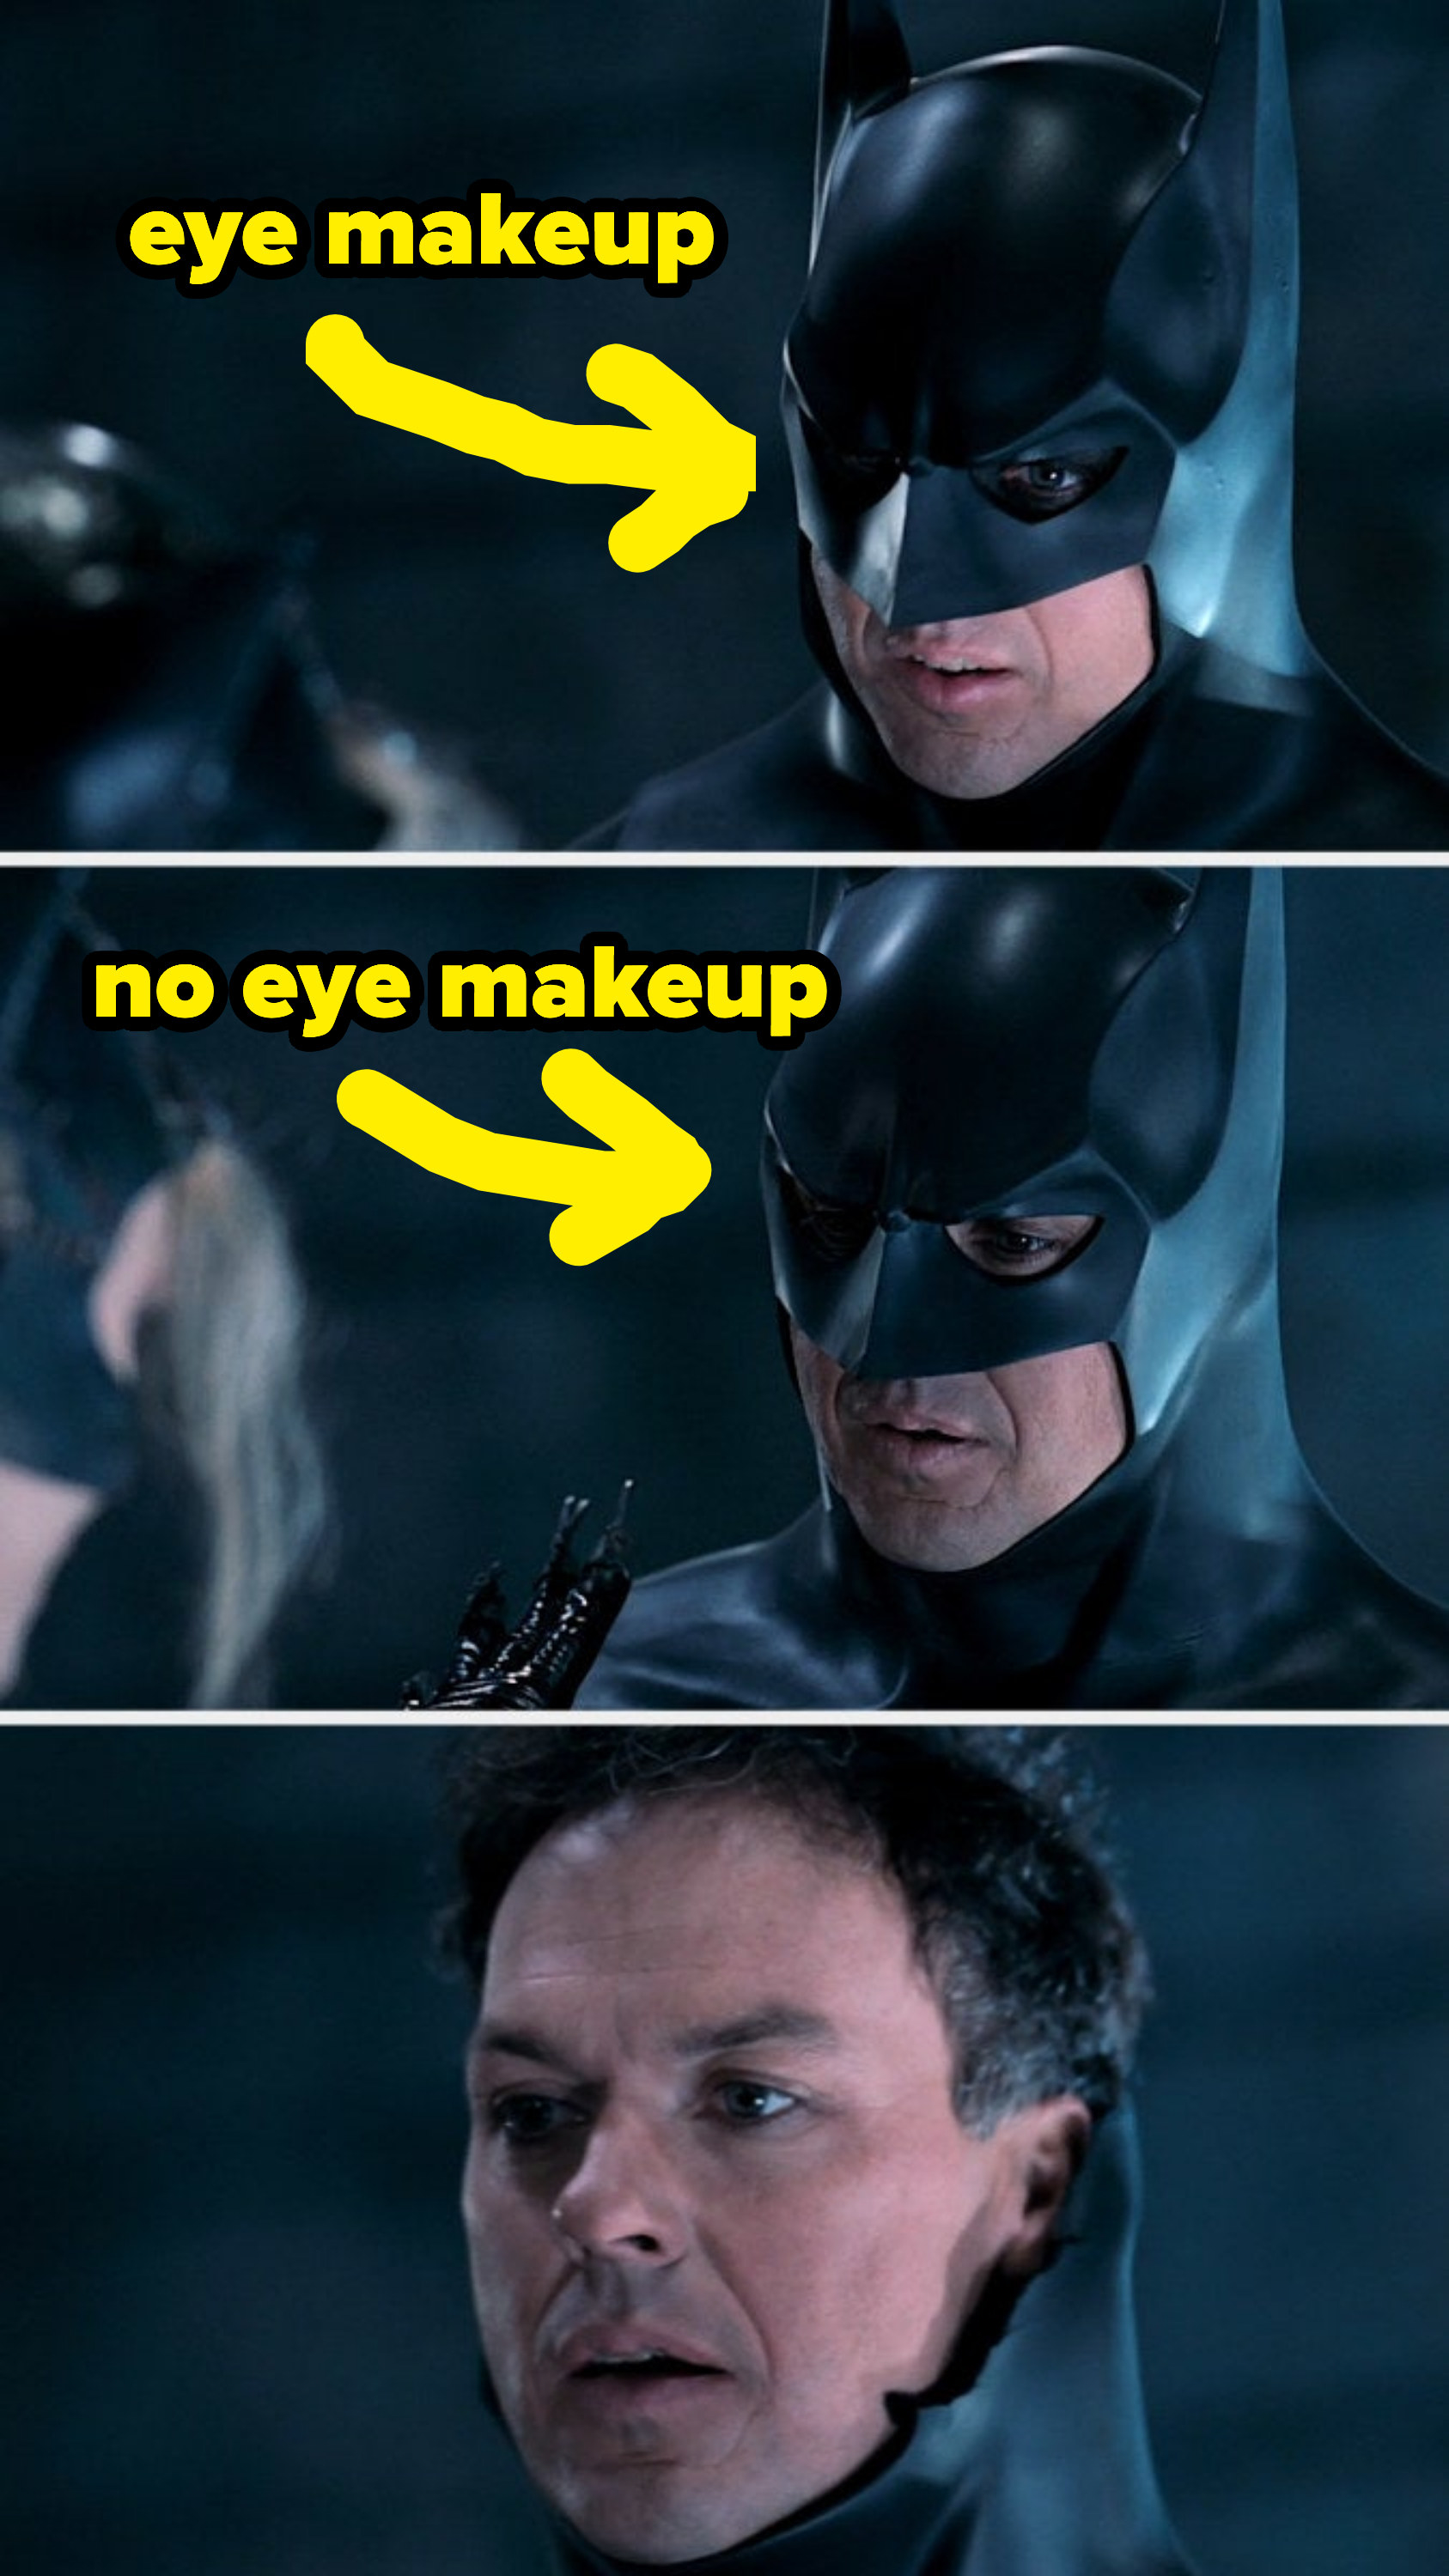 him with the batman masks on and the black makeup and then with the mask off and no eye makeup shown